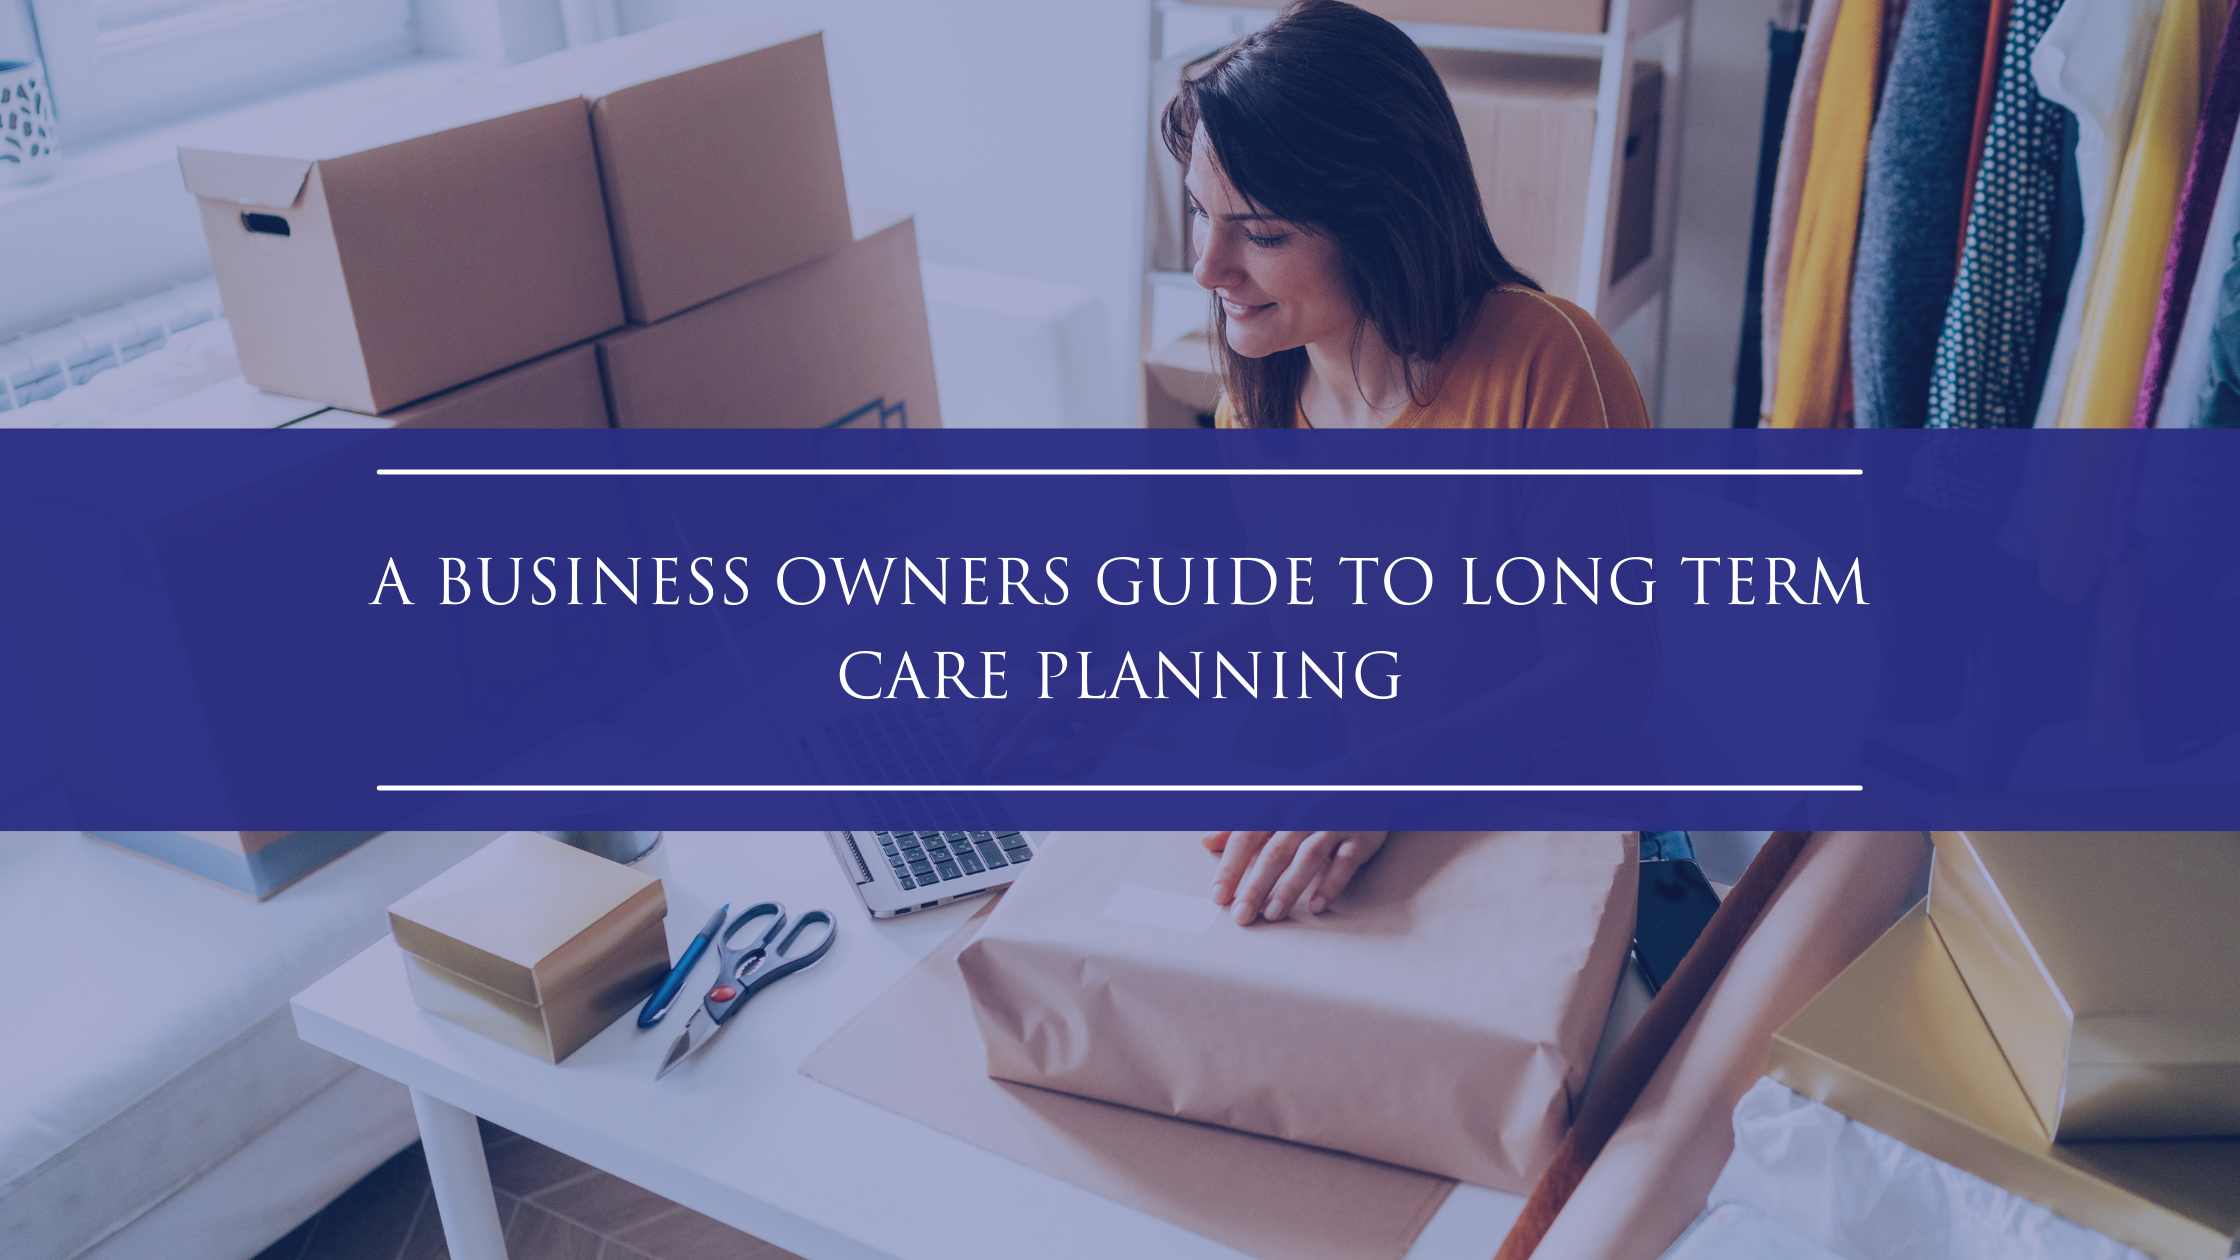 A Business Owner’s Guide to Long-Term Care Planning